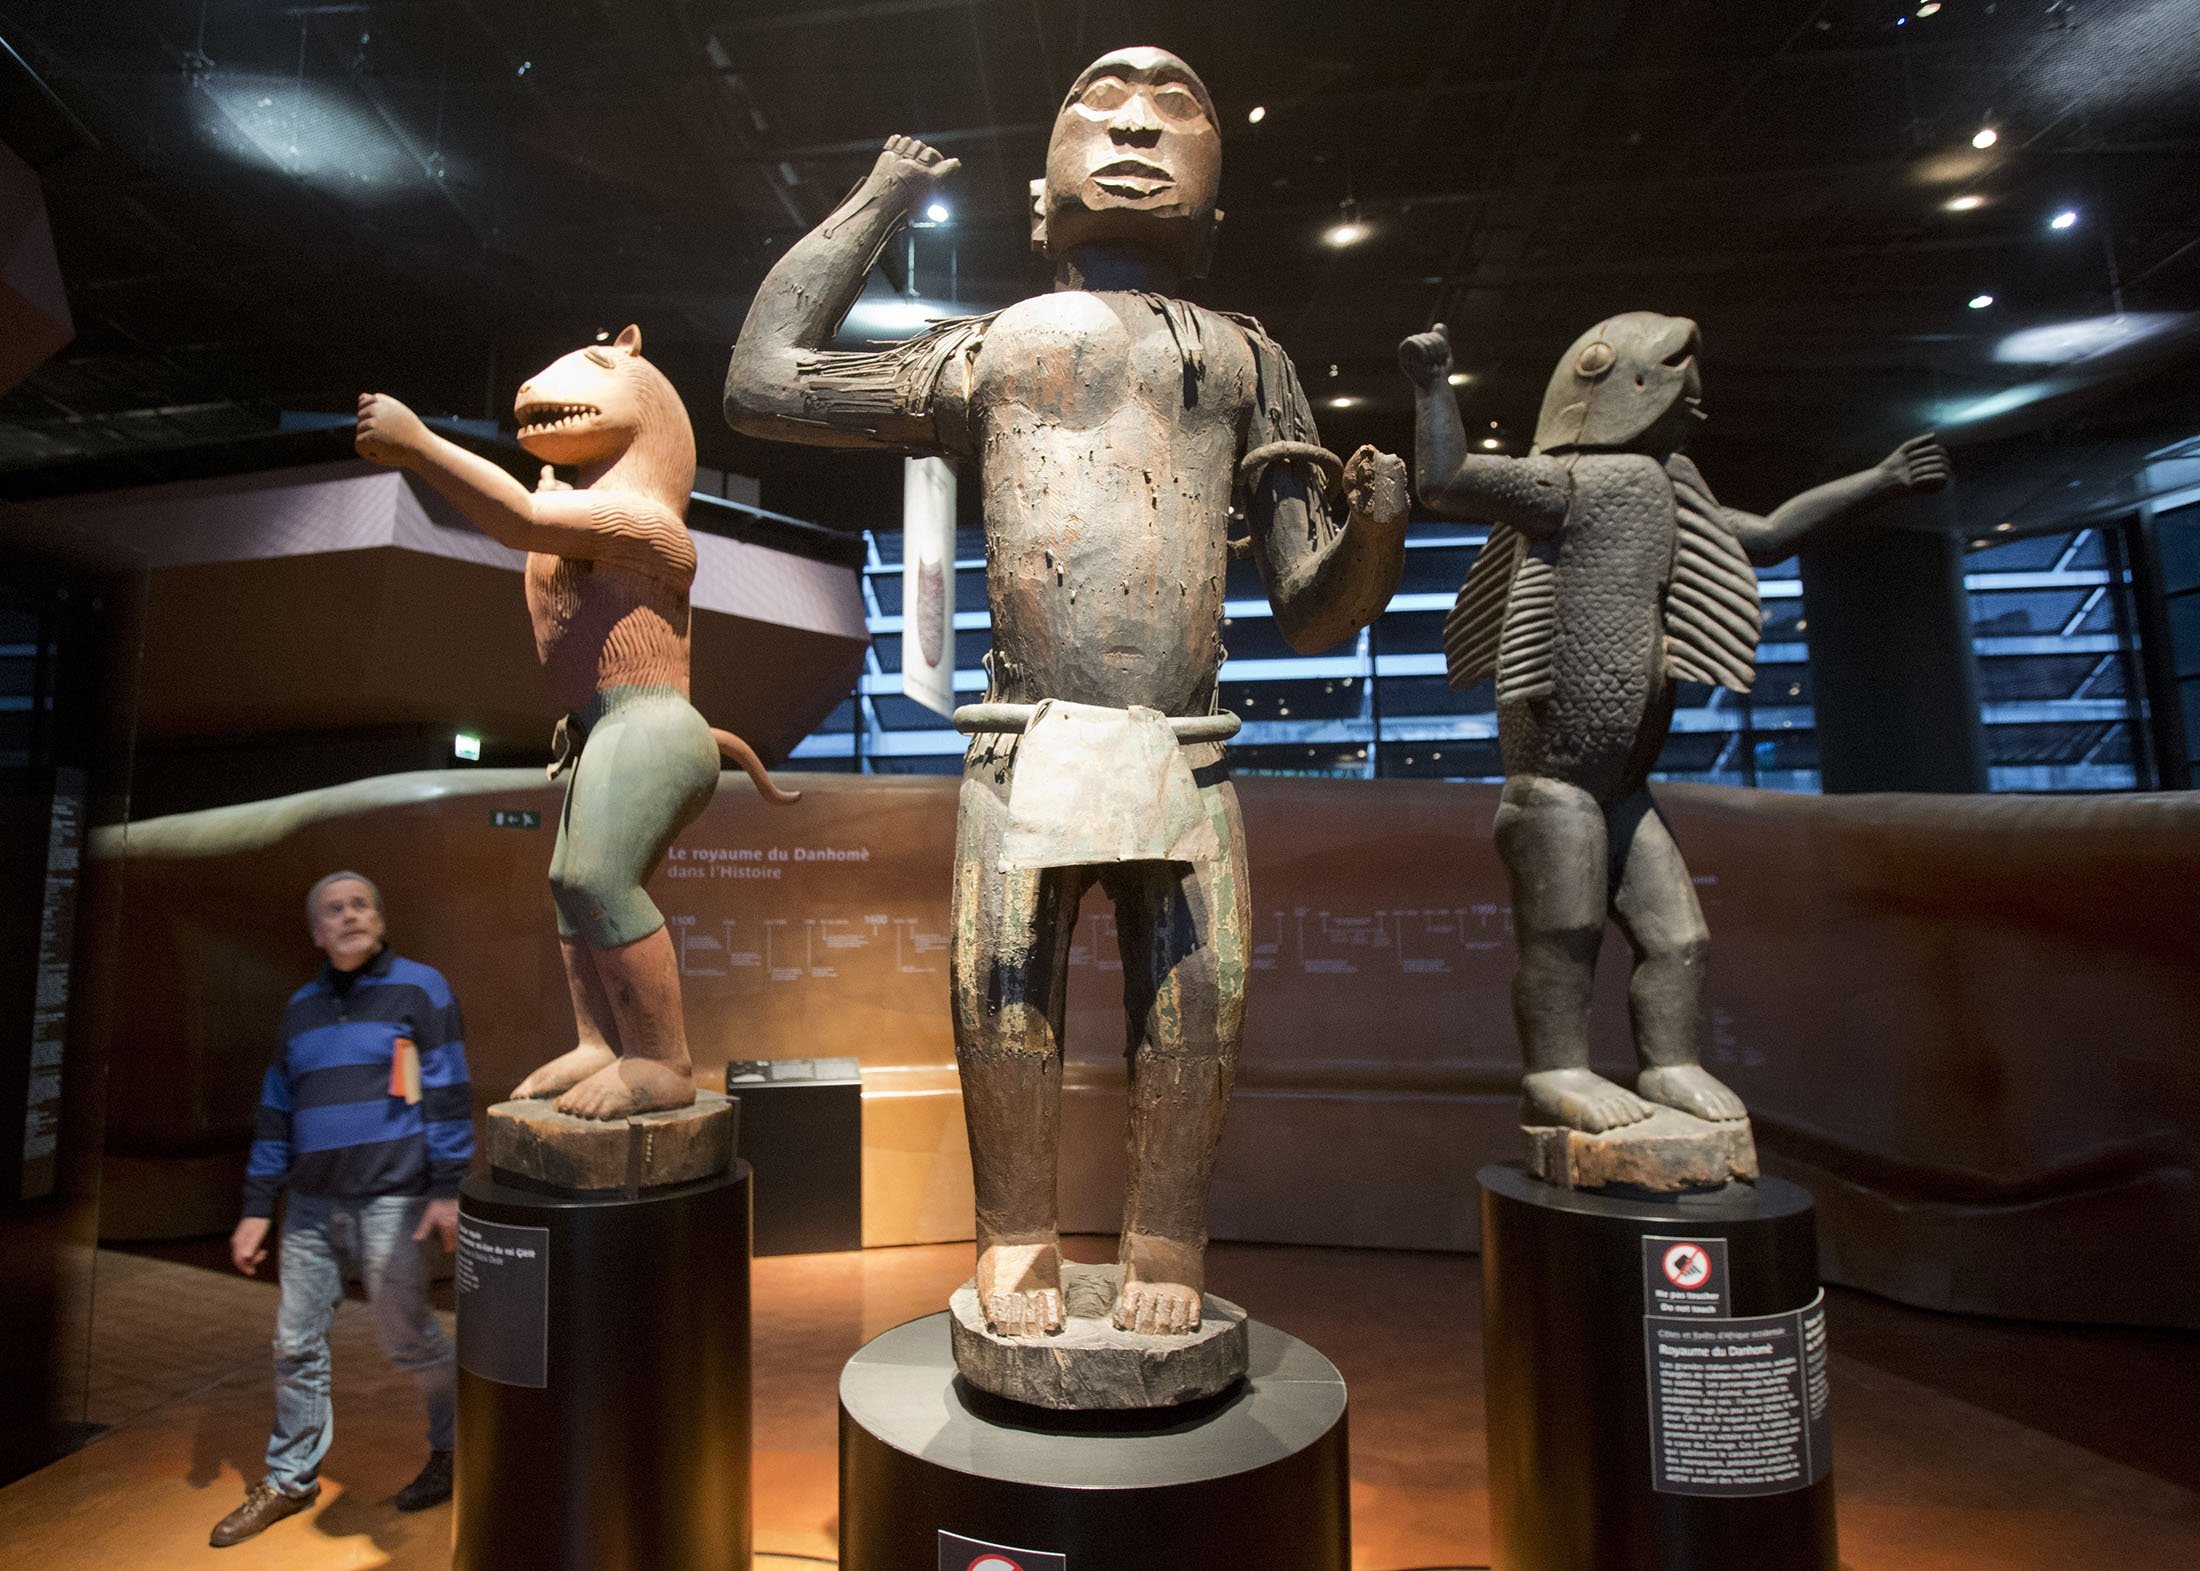 A visitor looks at wooden royal statues of the Dahomey kingdom, dated 19th century, at the Quai Branly – Jacques Chirac museum, in Paris, France, Nov. 23, 2018. (AP Photo)